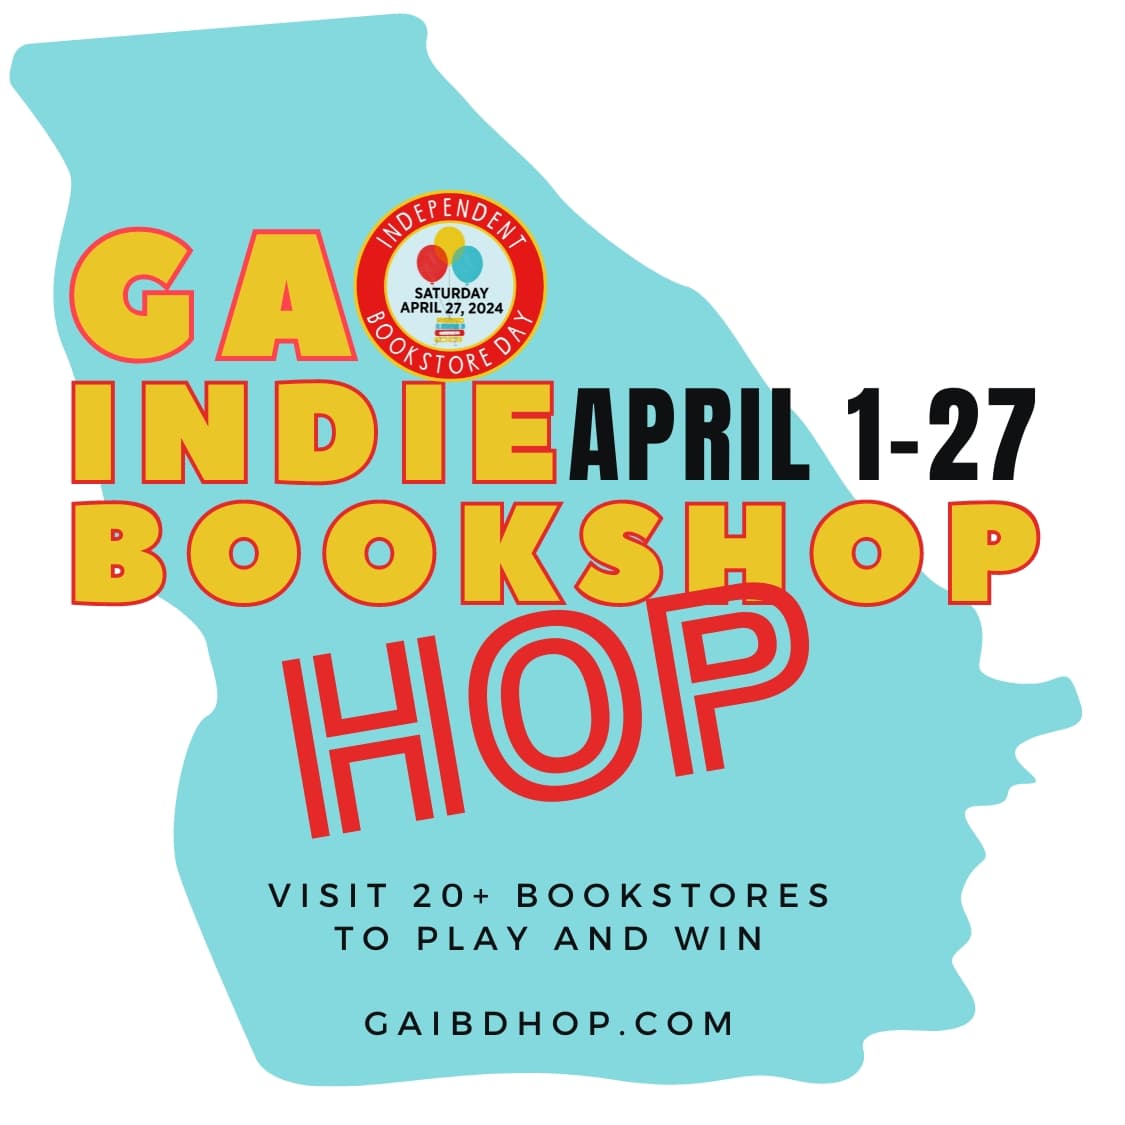 We are coming down to the last days of the #GeorgiaIndieBookshopHop! It culminates on Saturday, April 27th which is #IndependentBookstoreDay ! Come see us at Tall Tales, we will have authors from the Atlanta branch of #SistersinCrime visiting starting at 11:00 !  #shopindie